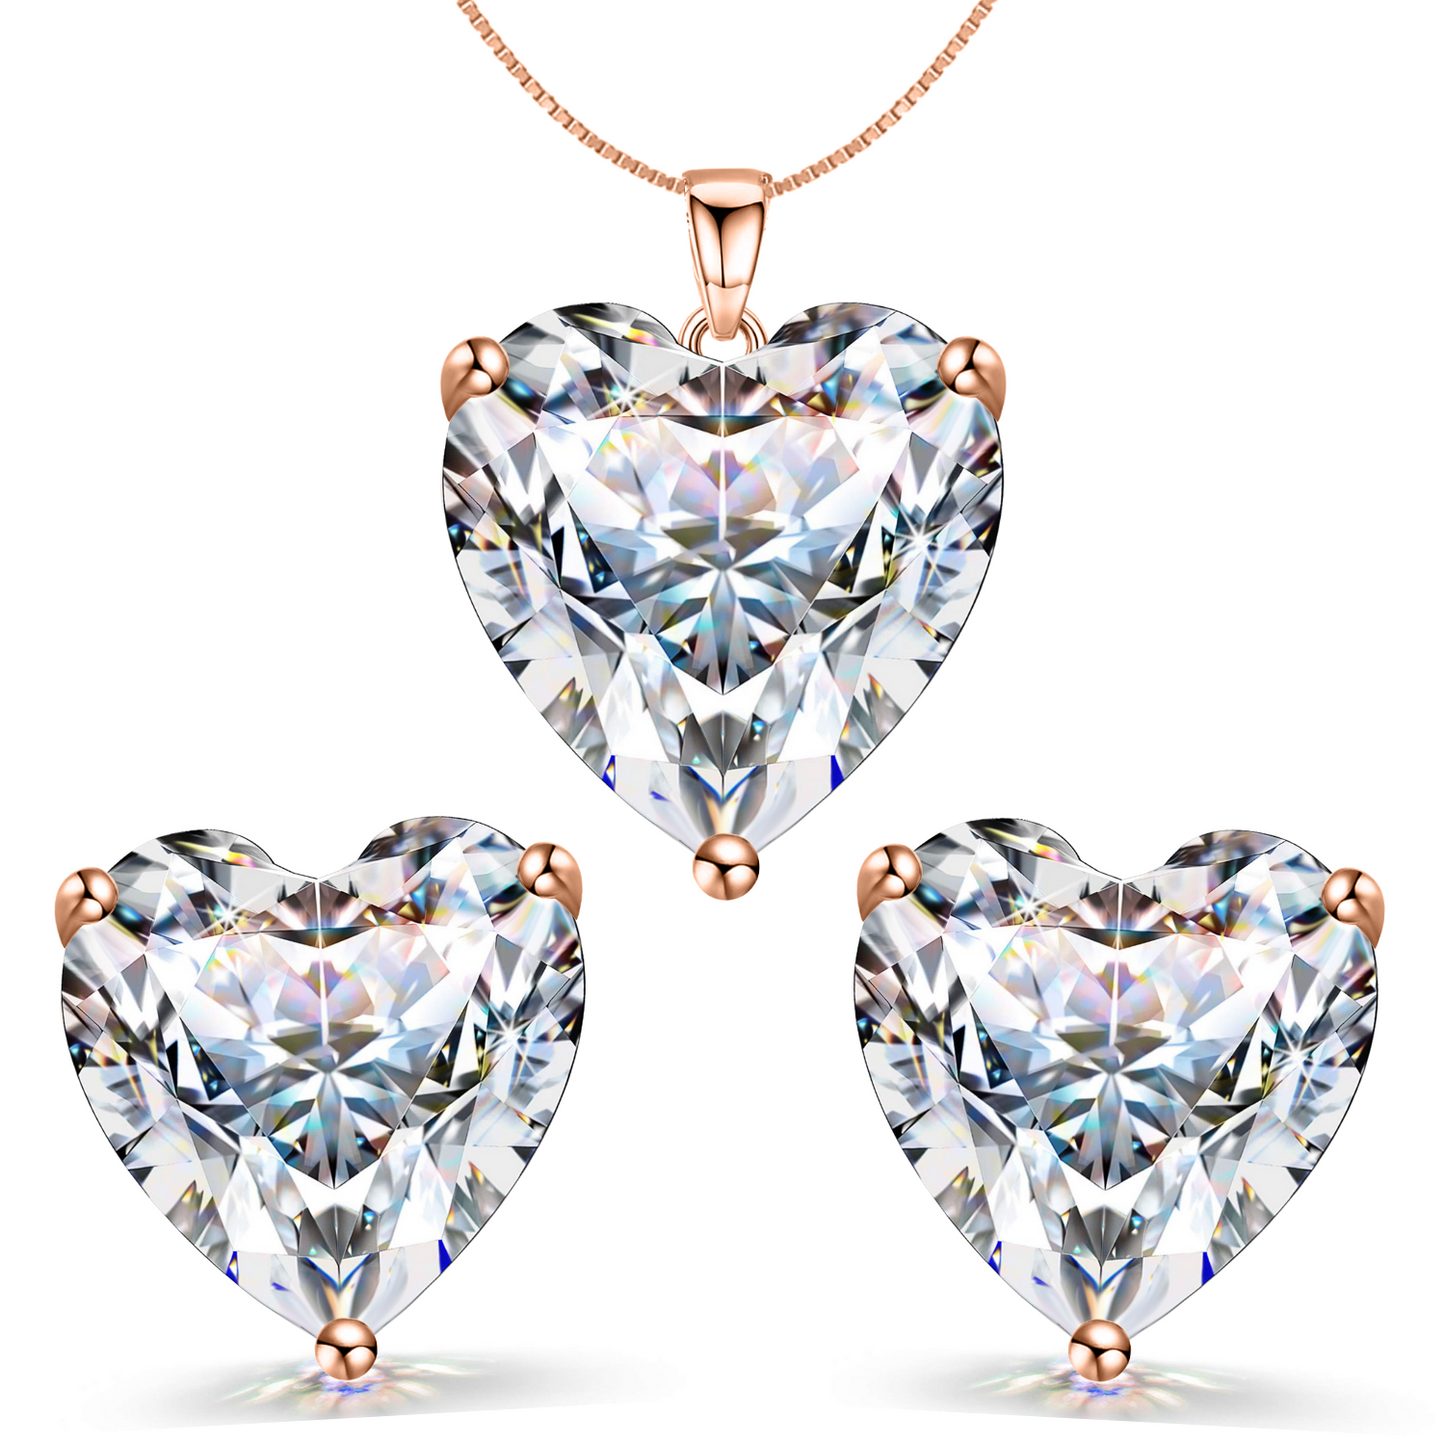 Solitaire Heart Earrings, Pendant & Chain Set in 92.5 Silver - 18k Rose Gold finish - embellished with Swarovski Zirconia